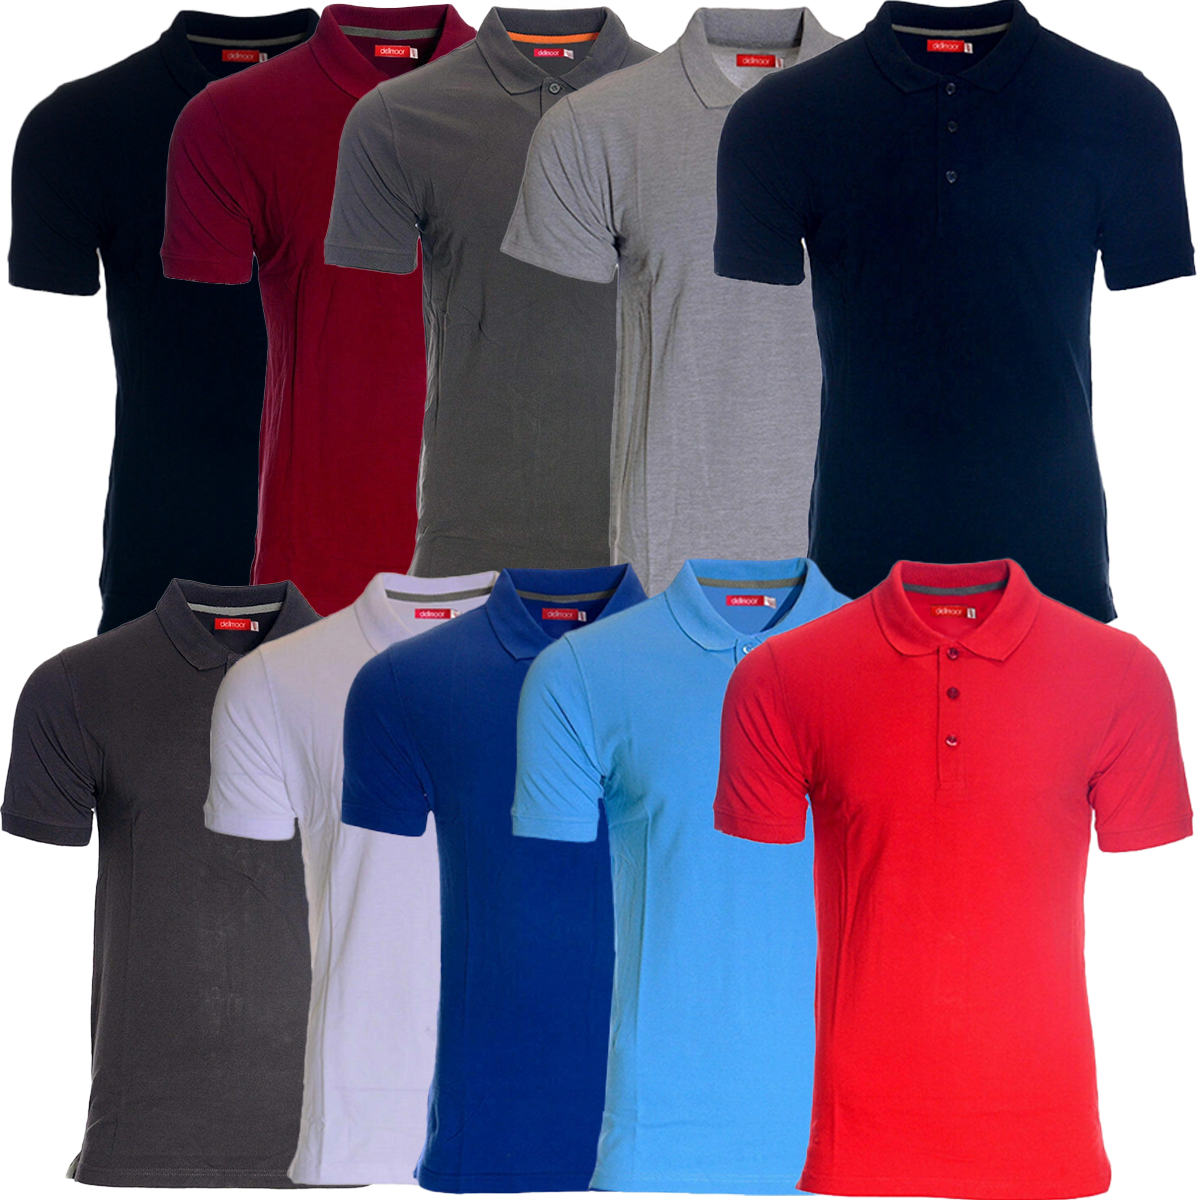 Men’s Casual Polo Shirts Short Sleeve Regular Fit Sizes M-4XL for Sports Wear